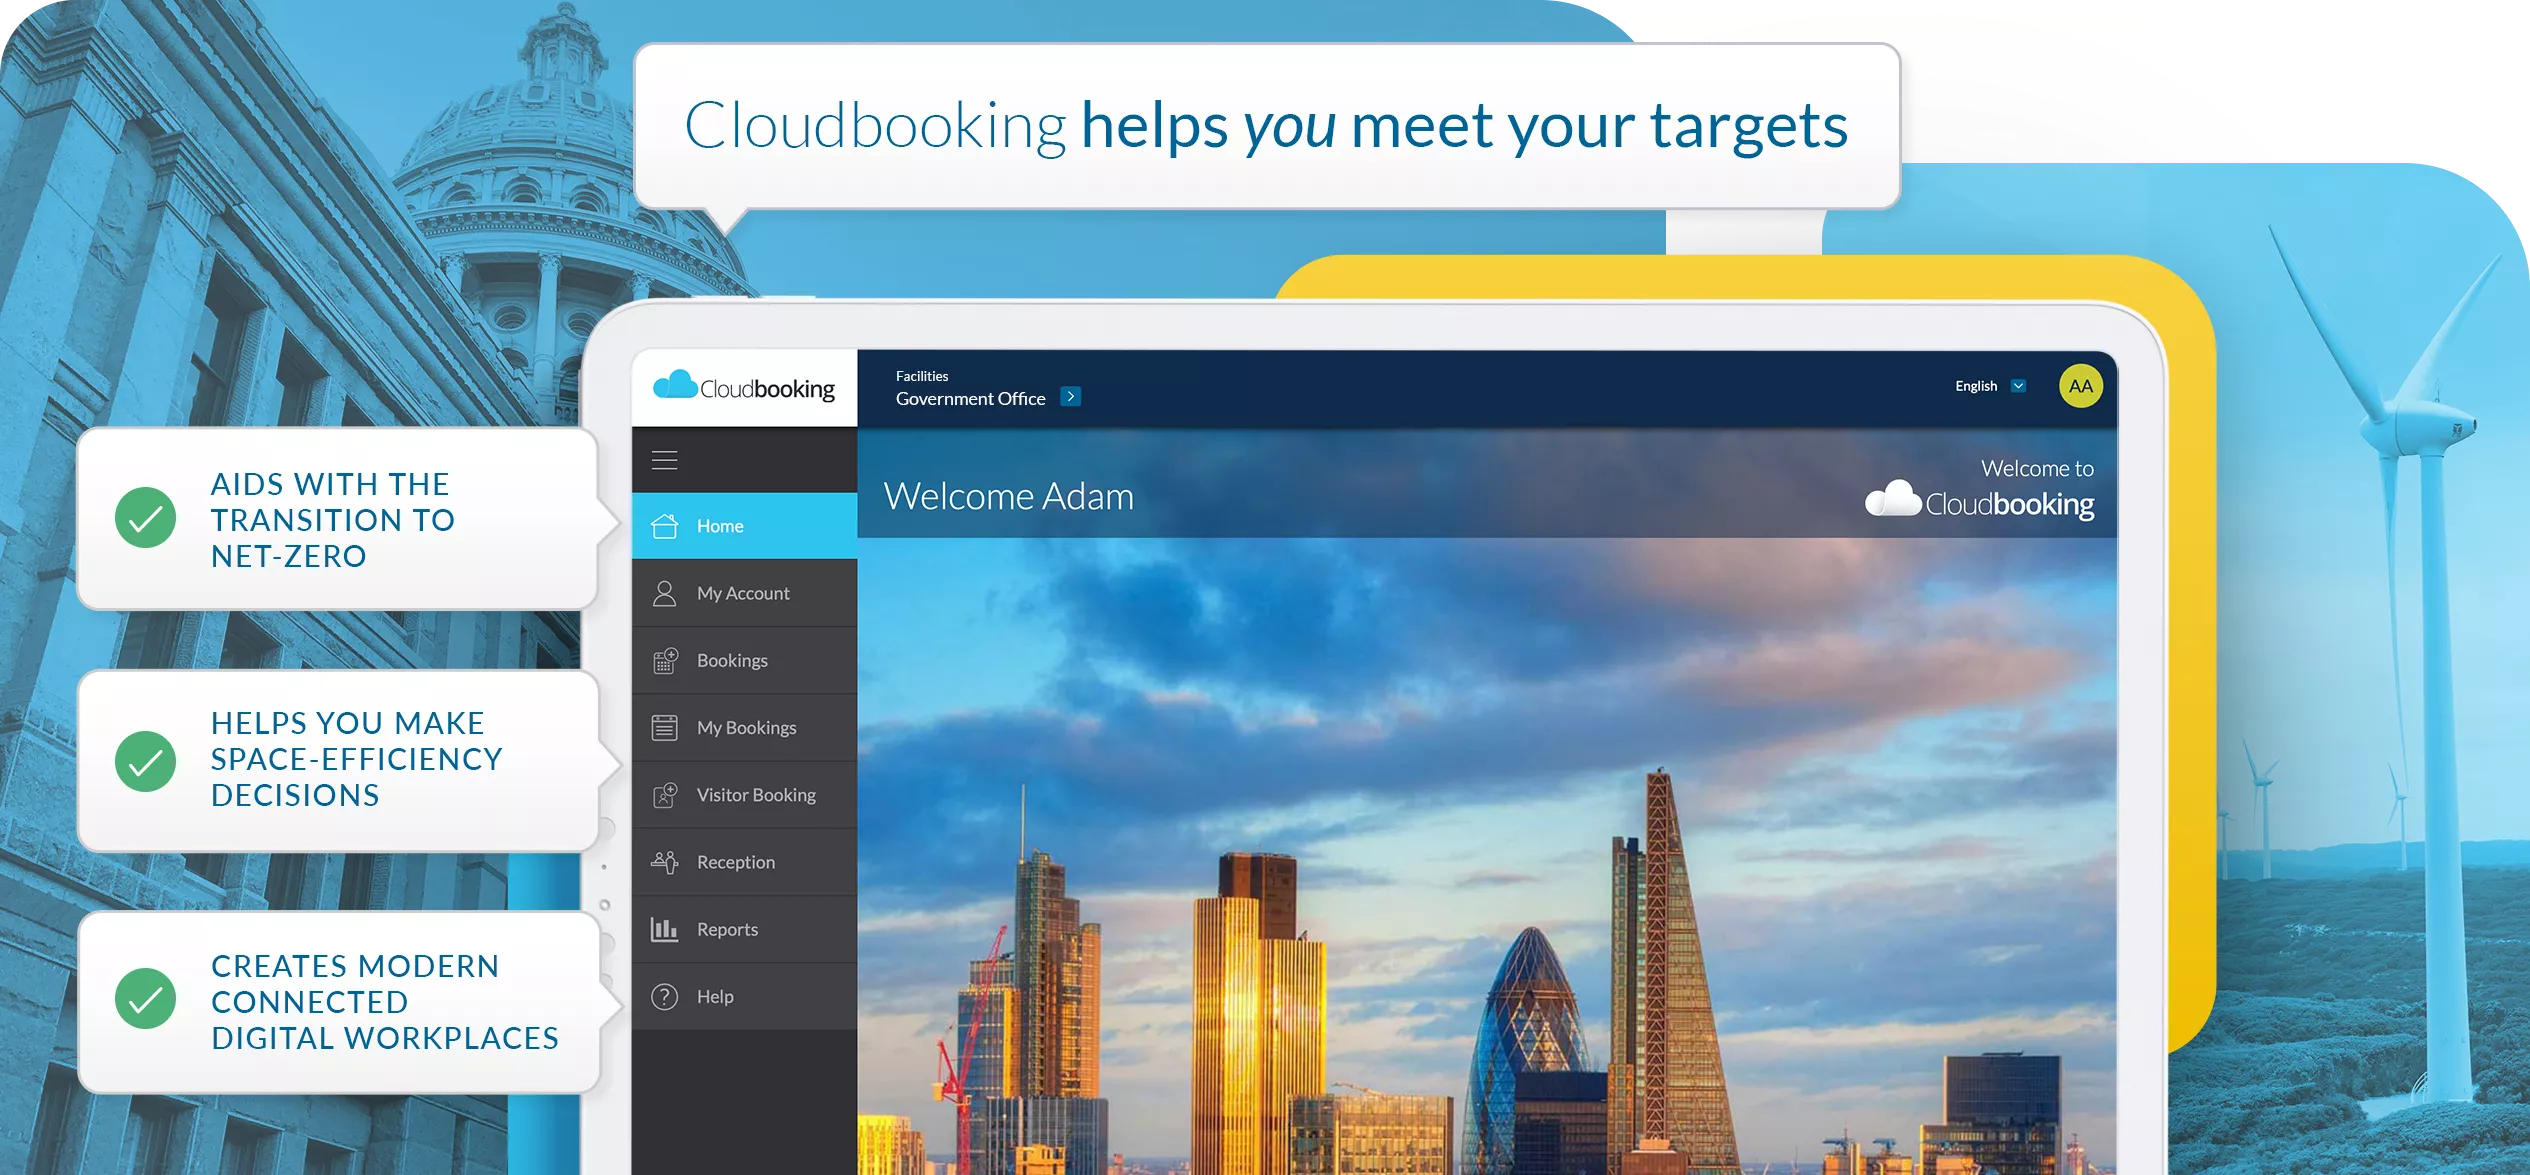 Cloudbooking helps you meet your government targets